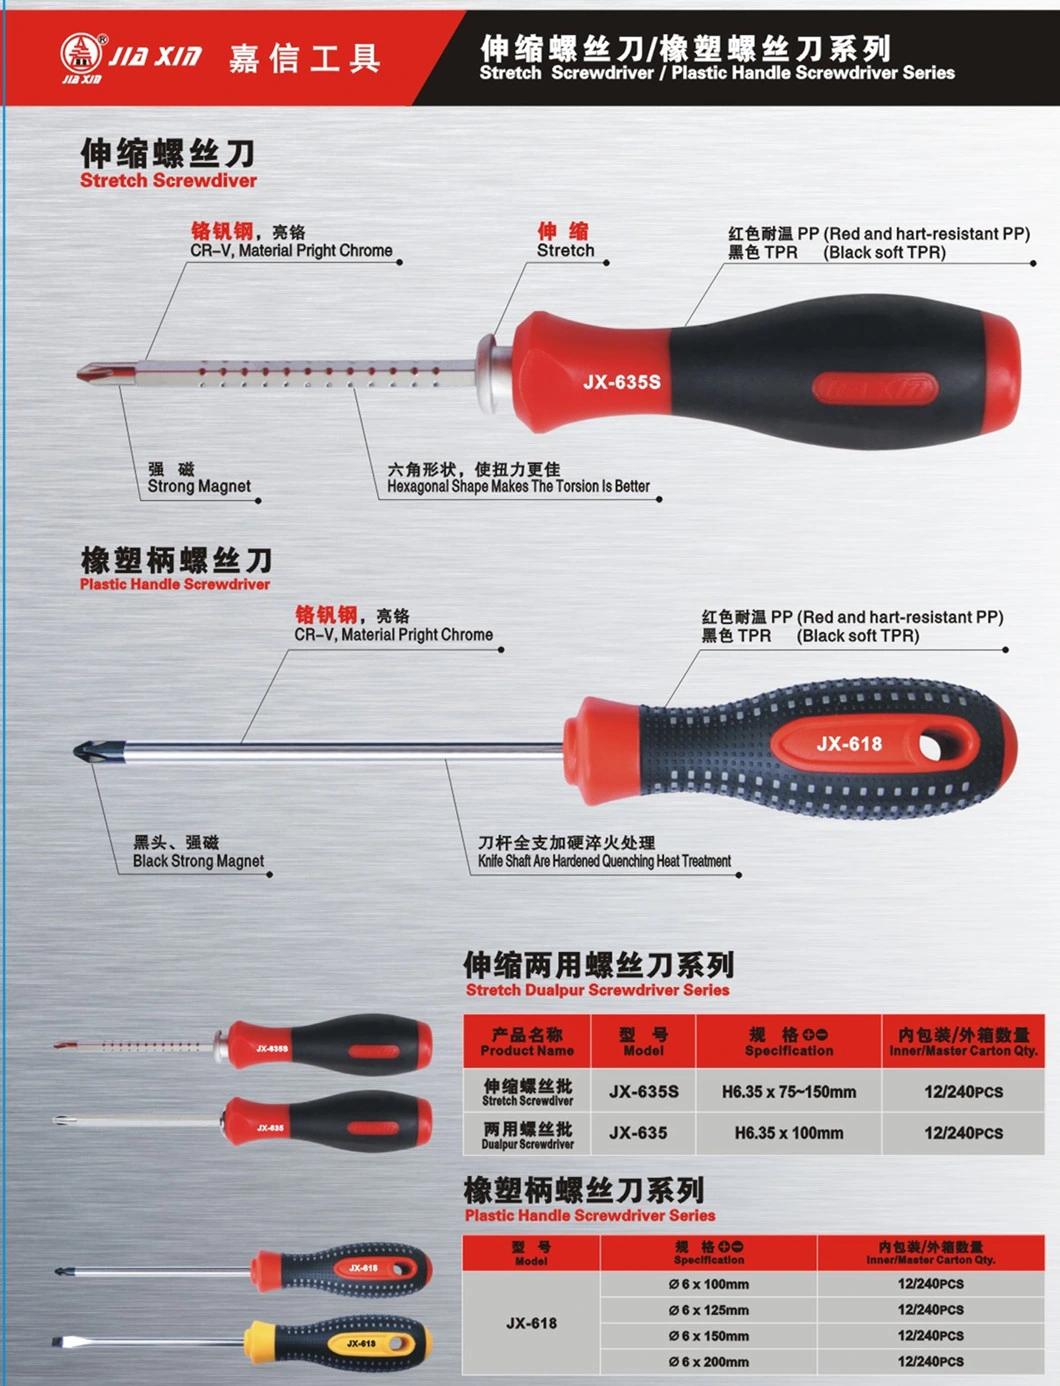 International High Quality Multi-Purpose Screwdriver with Adjustable Length